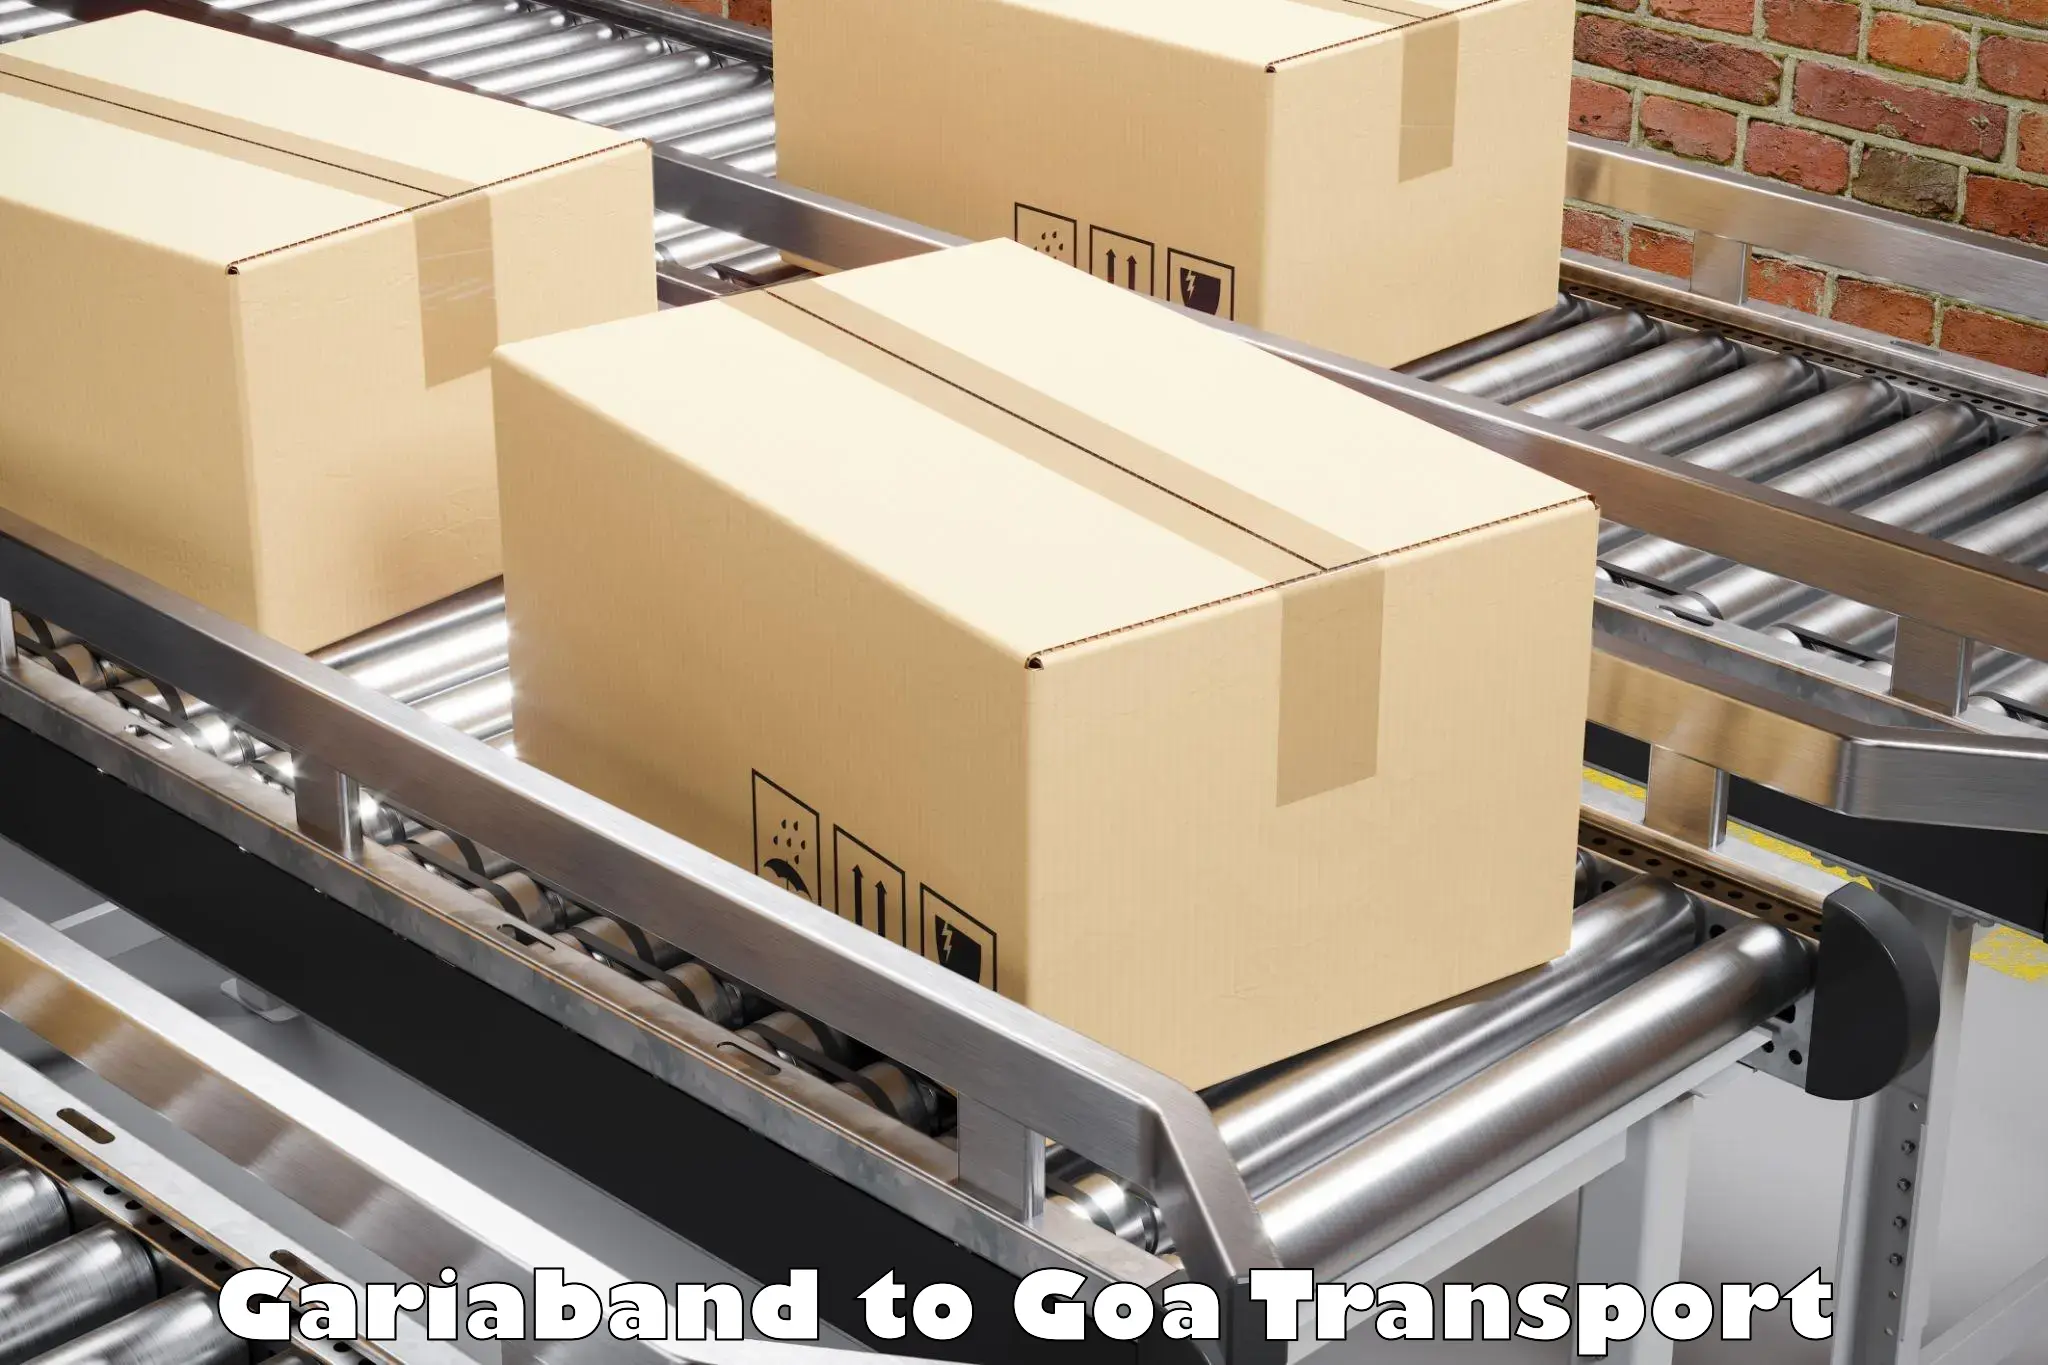 Delivery service Gariaband to Goa